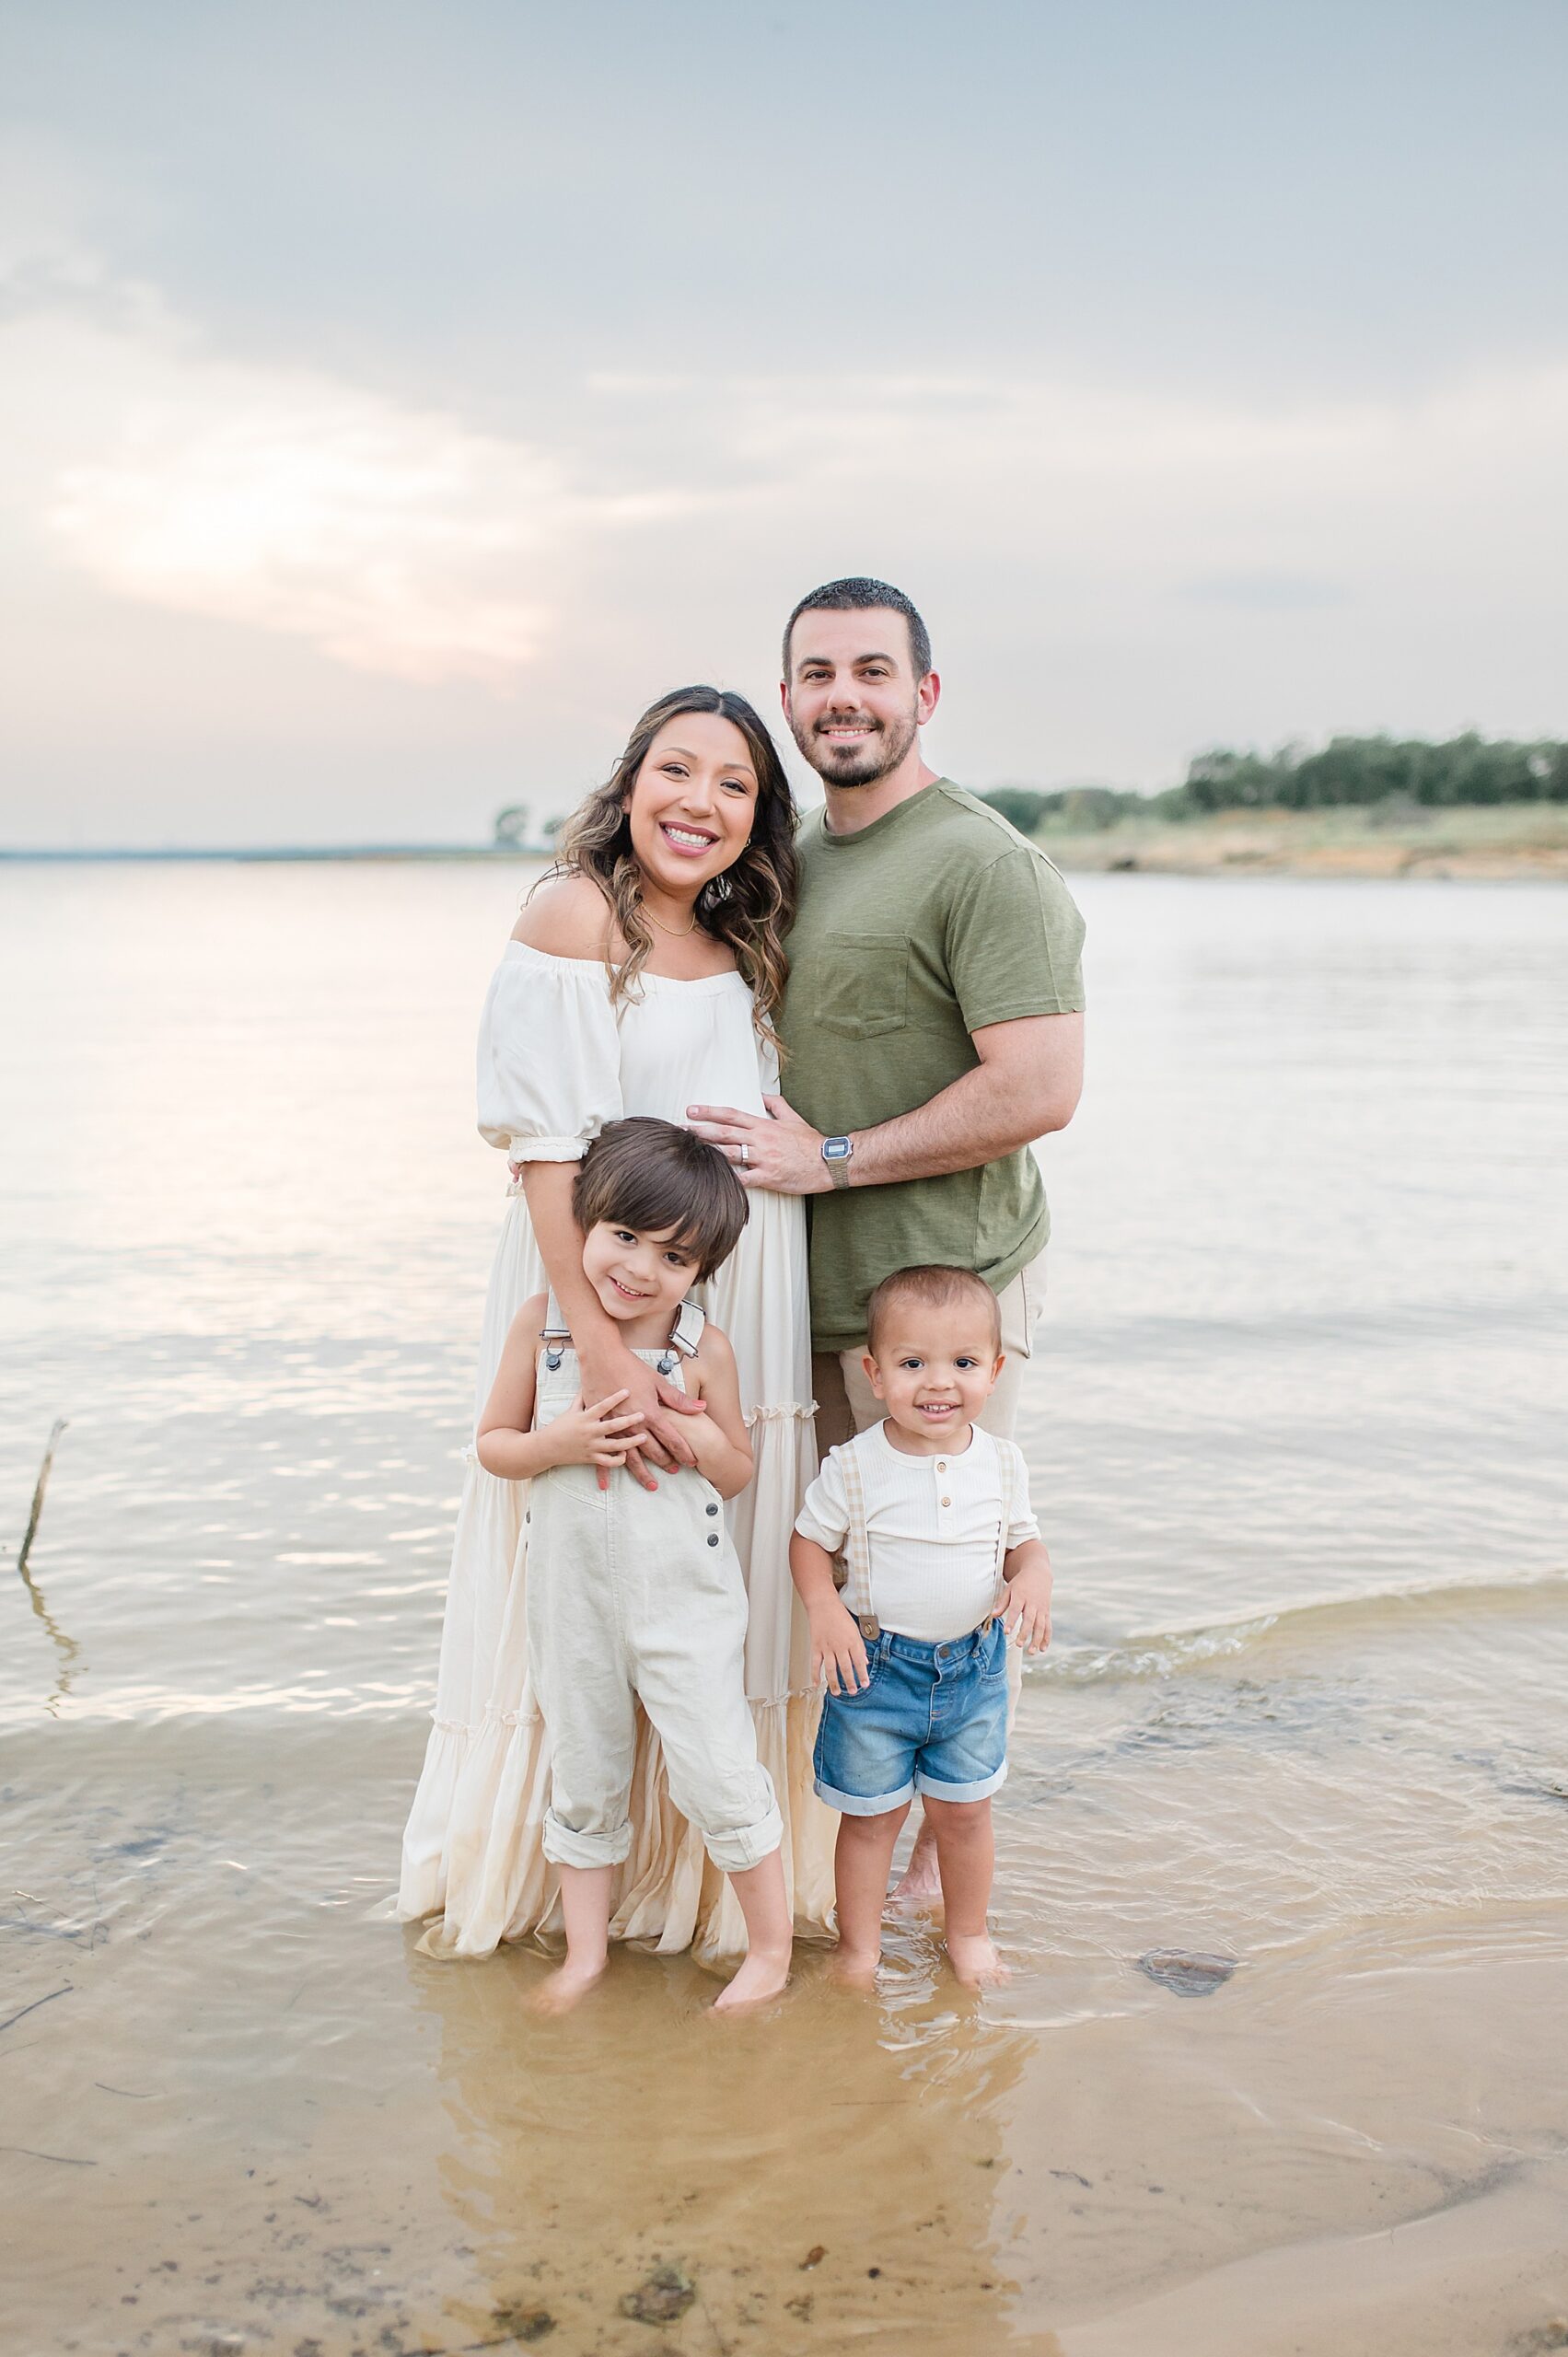 Top 11 Dallas-Fort Worth Picture Locations at Murrell Park photographed by Lindsey Dutton Photography, a Dallas Family photographer
